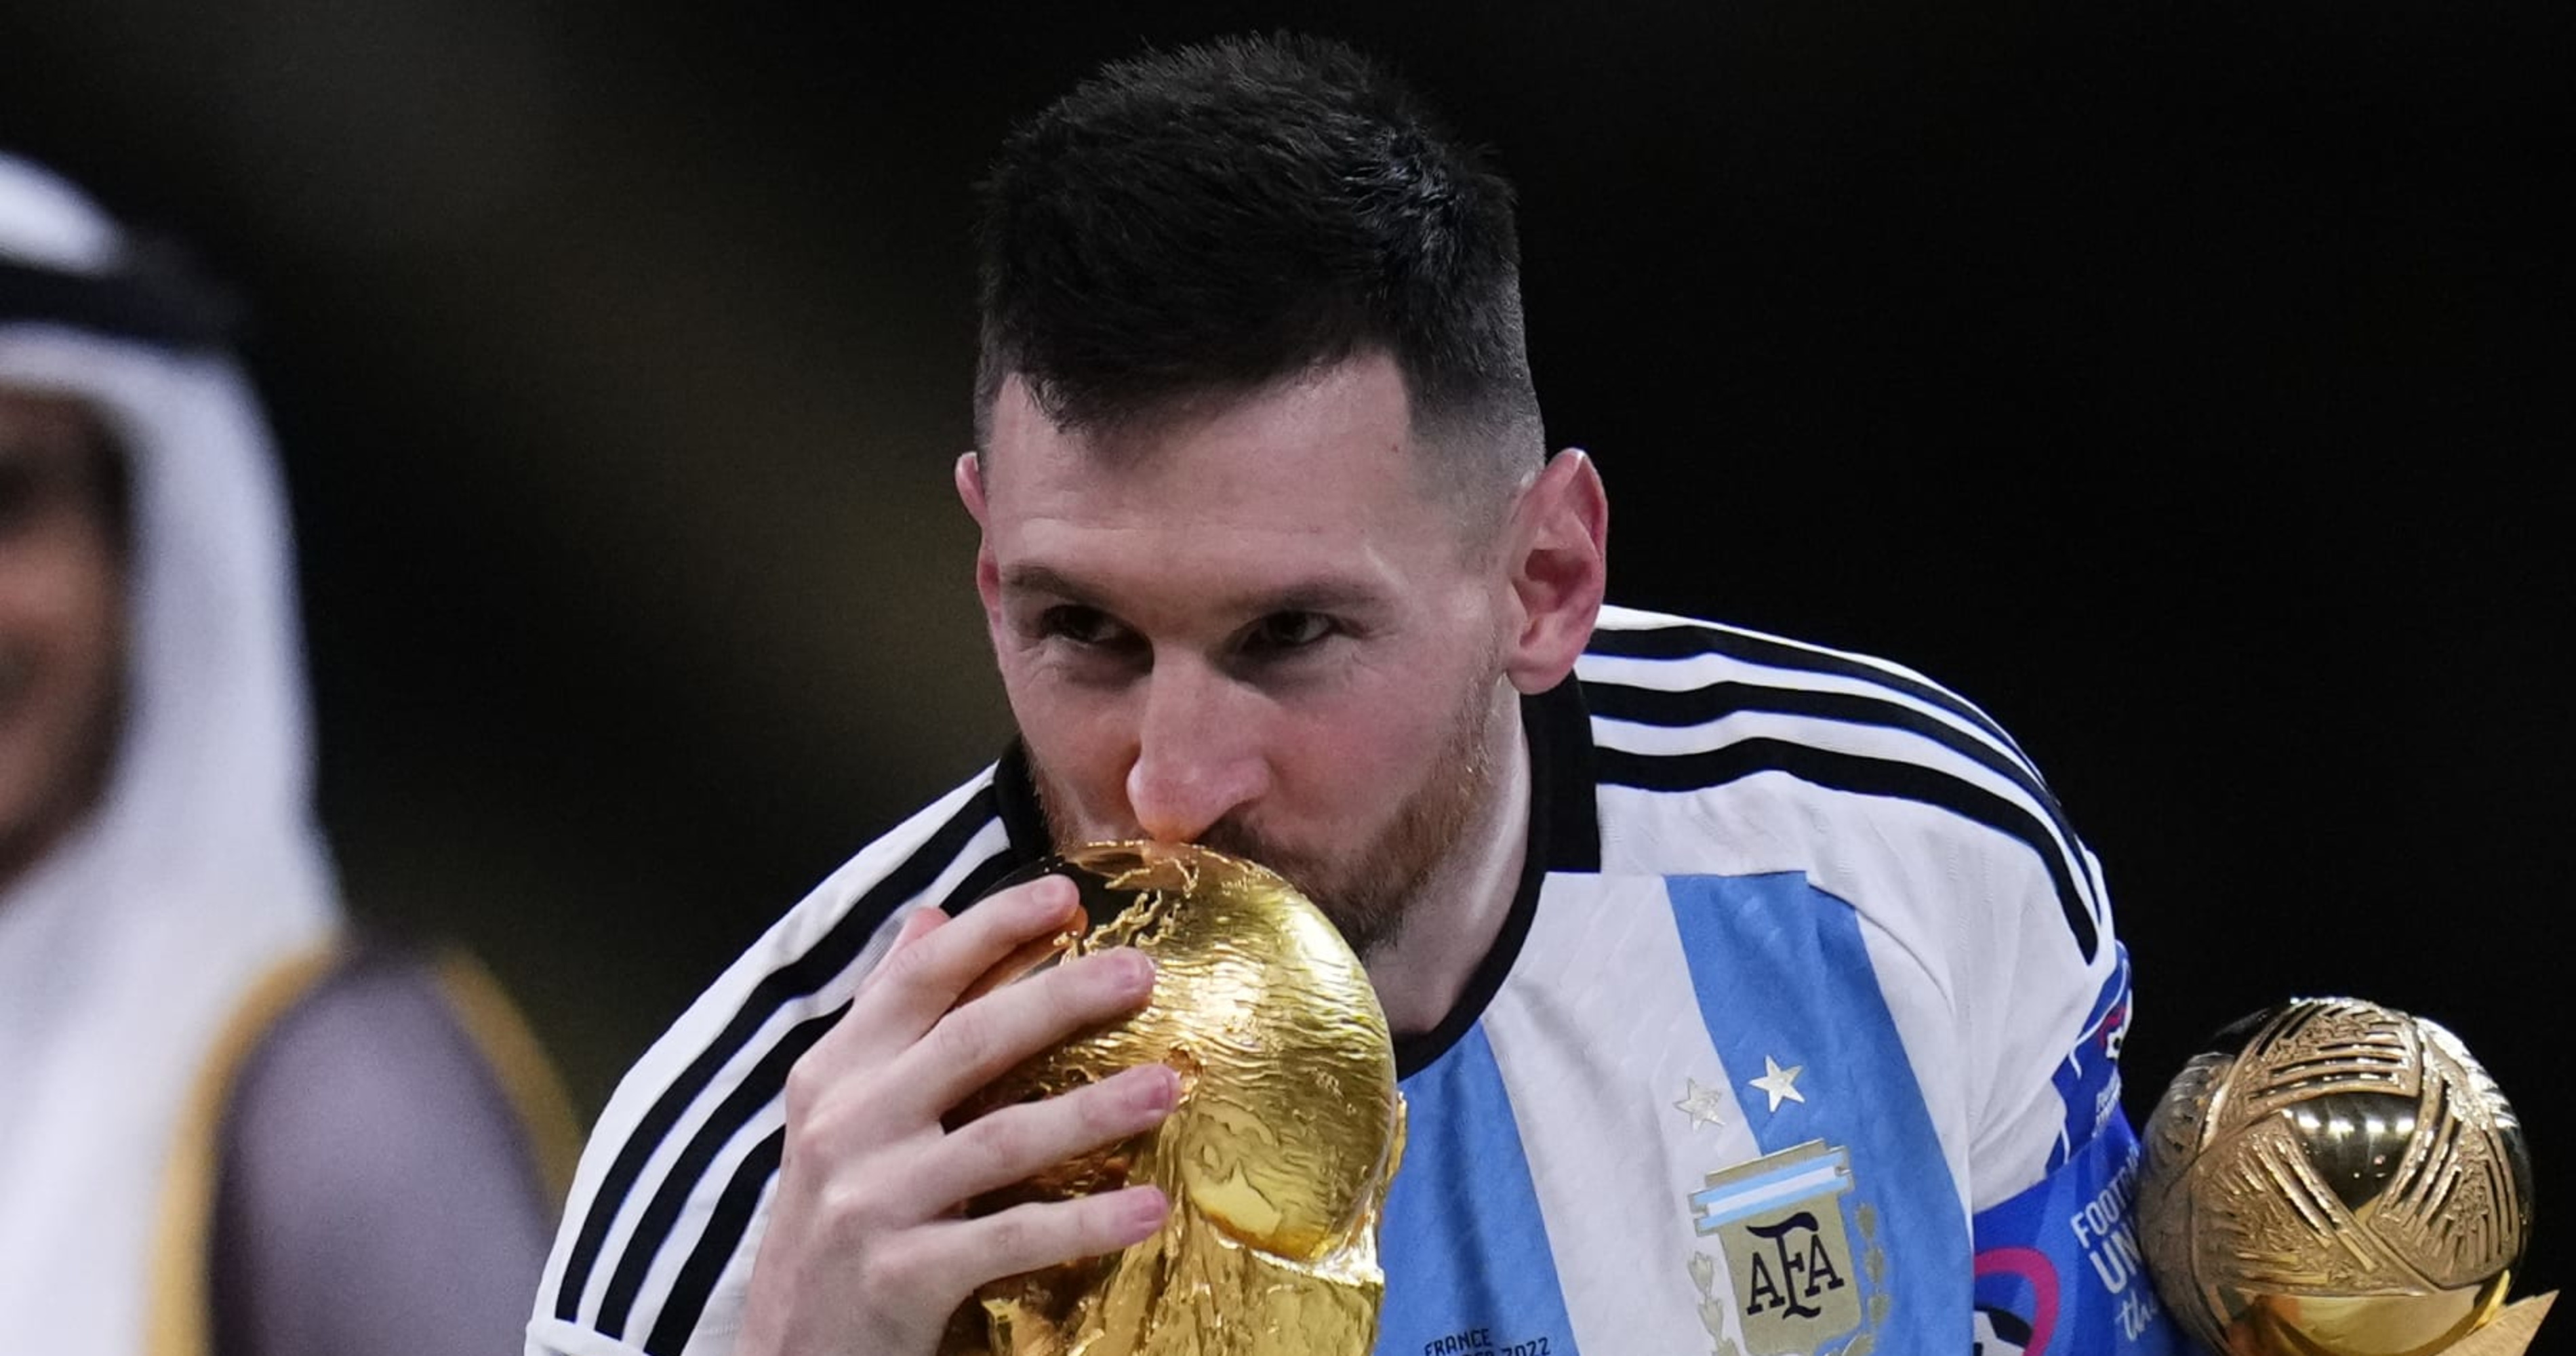 Lionel Messi Says He's Not Retiring from Argentina Team After World Cup Win